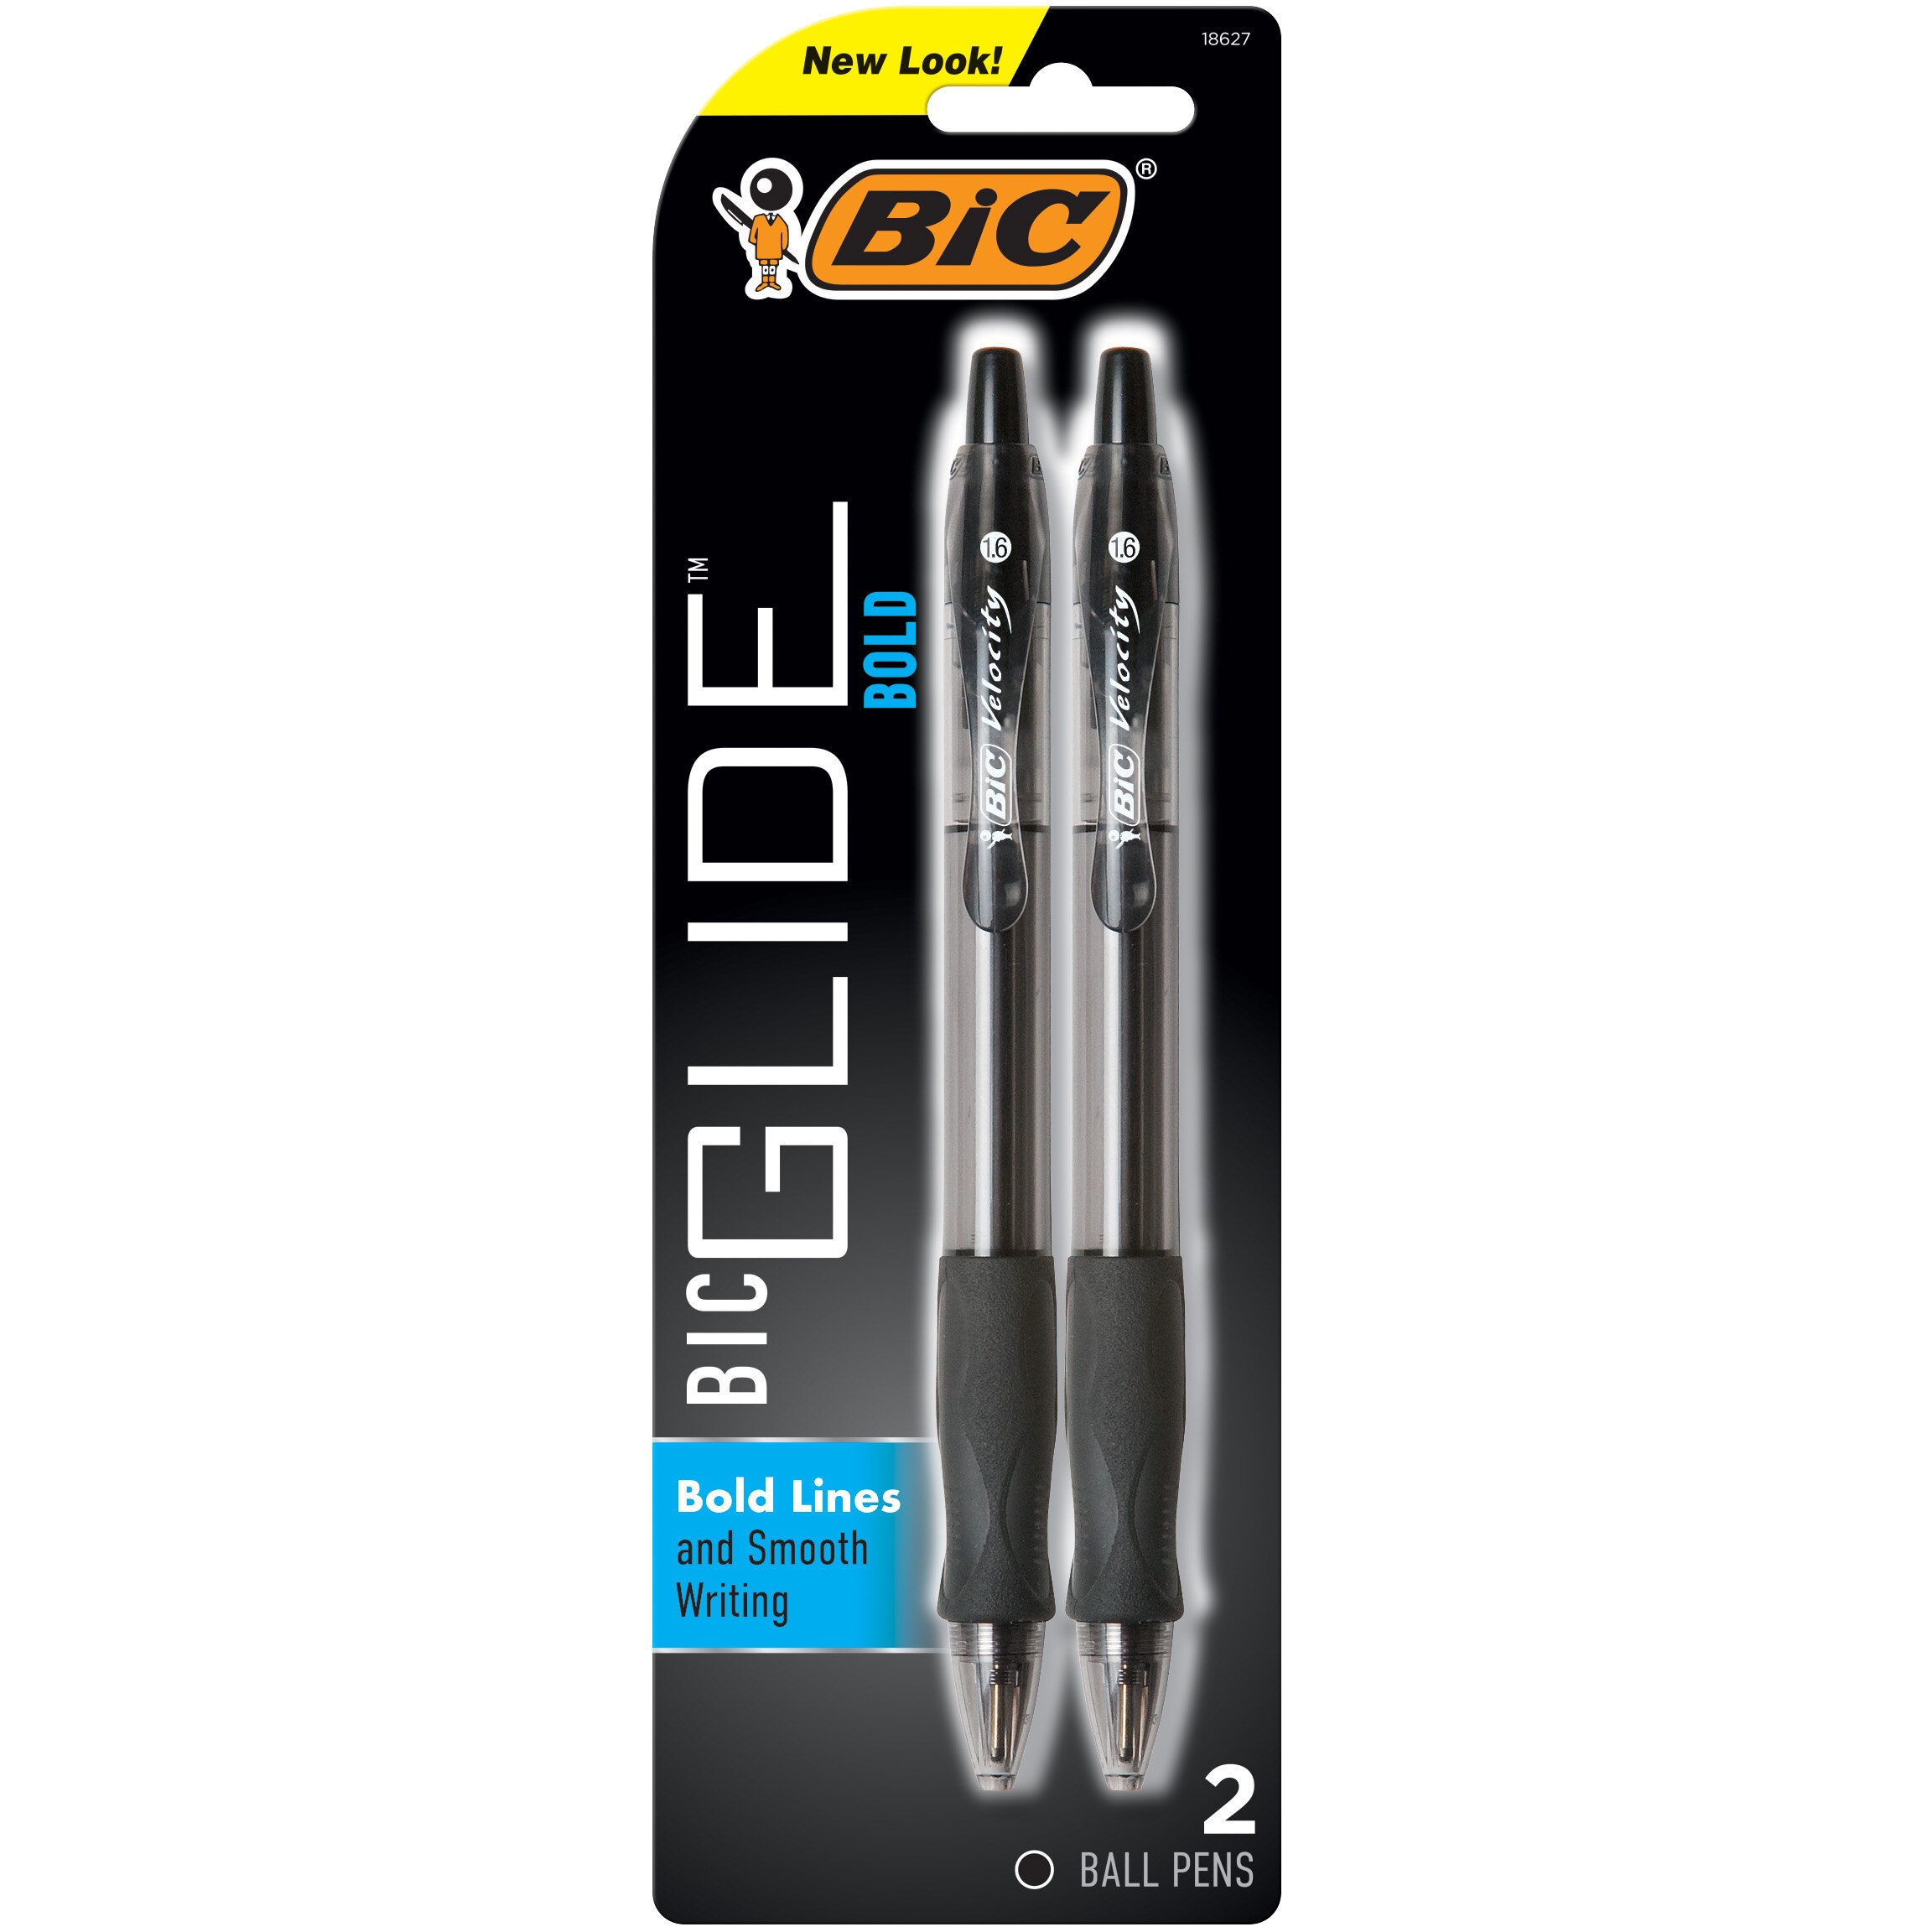 BIC Glide Bold Retractable Ballpoint Pens, 1.6mm Point, Black, 2-Pack